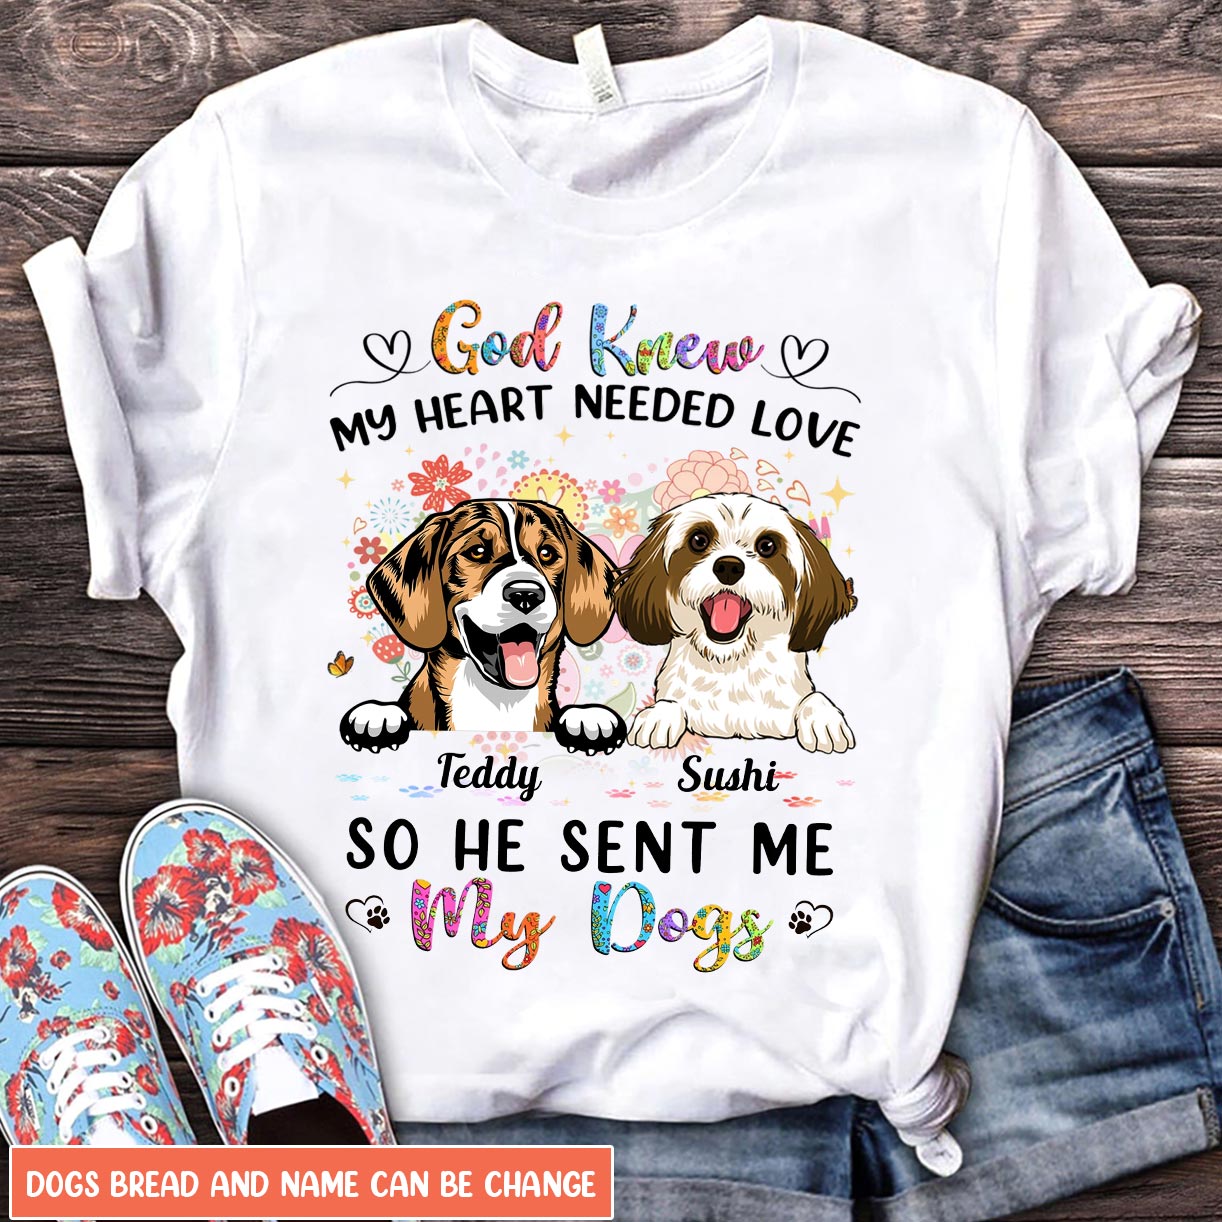 God Knew My Heart Needed Love Dog Personalized Gift for Dog Lovers, Dog Dad, Dog Mom